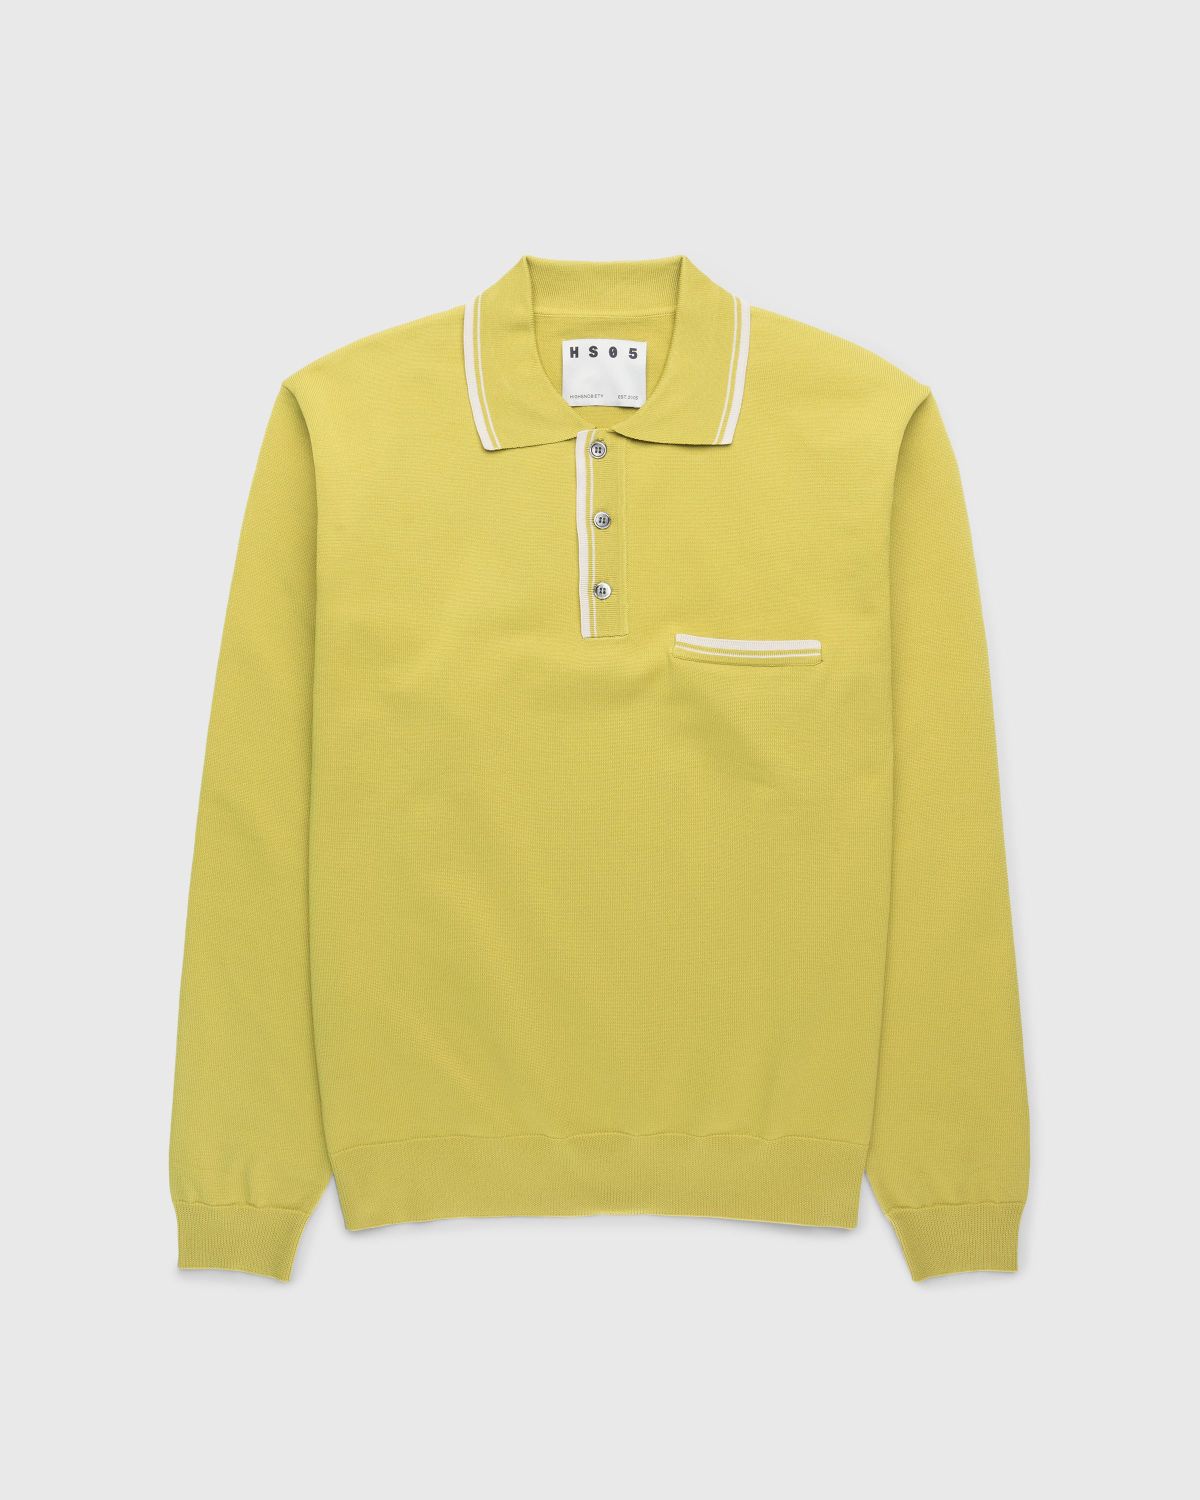 Highsnobiety HS05 – Long Sleeves Knit Polo Green - Longsleeves - Green - Image 1